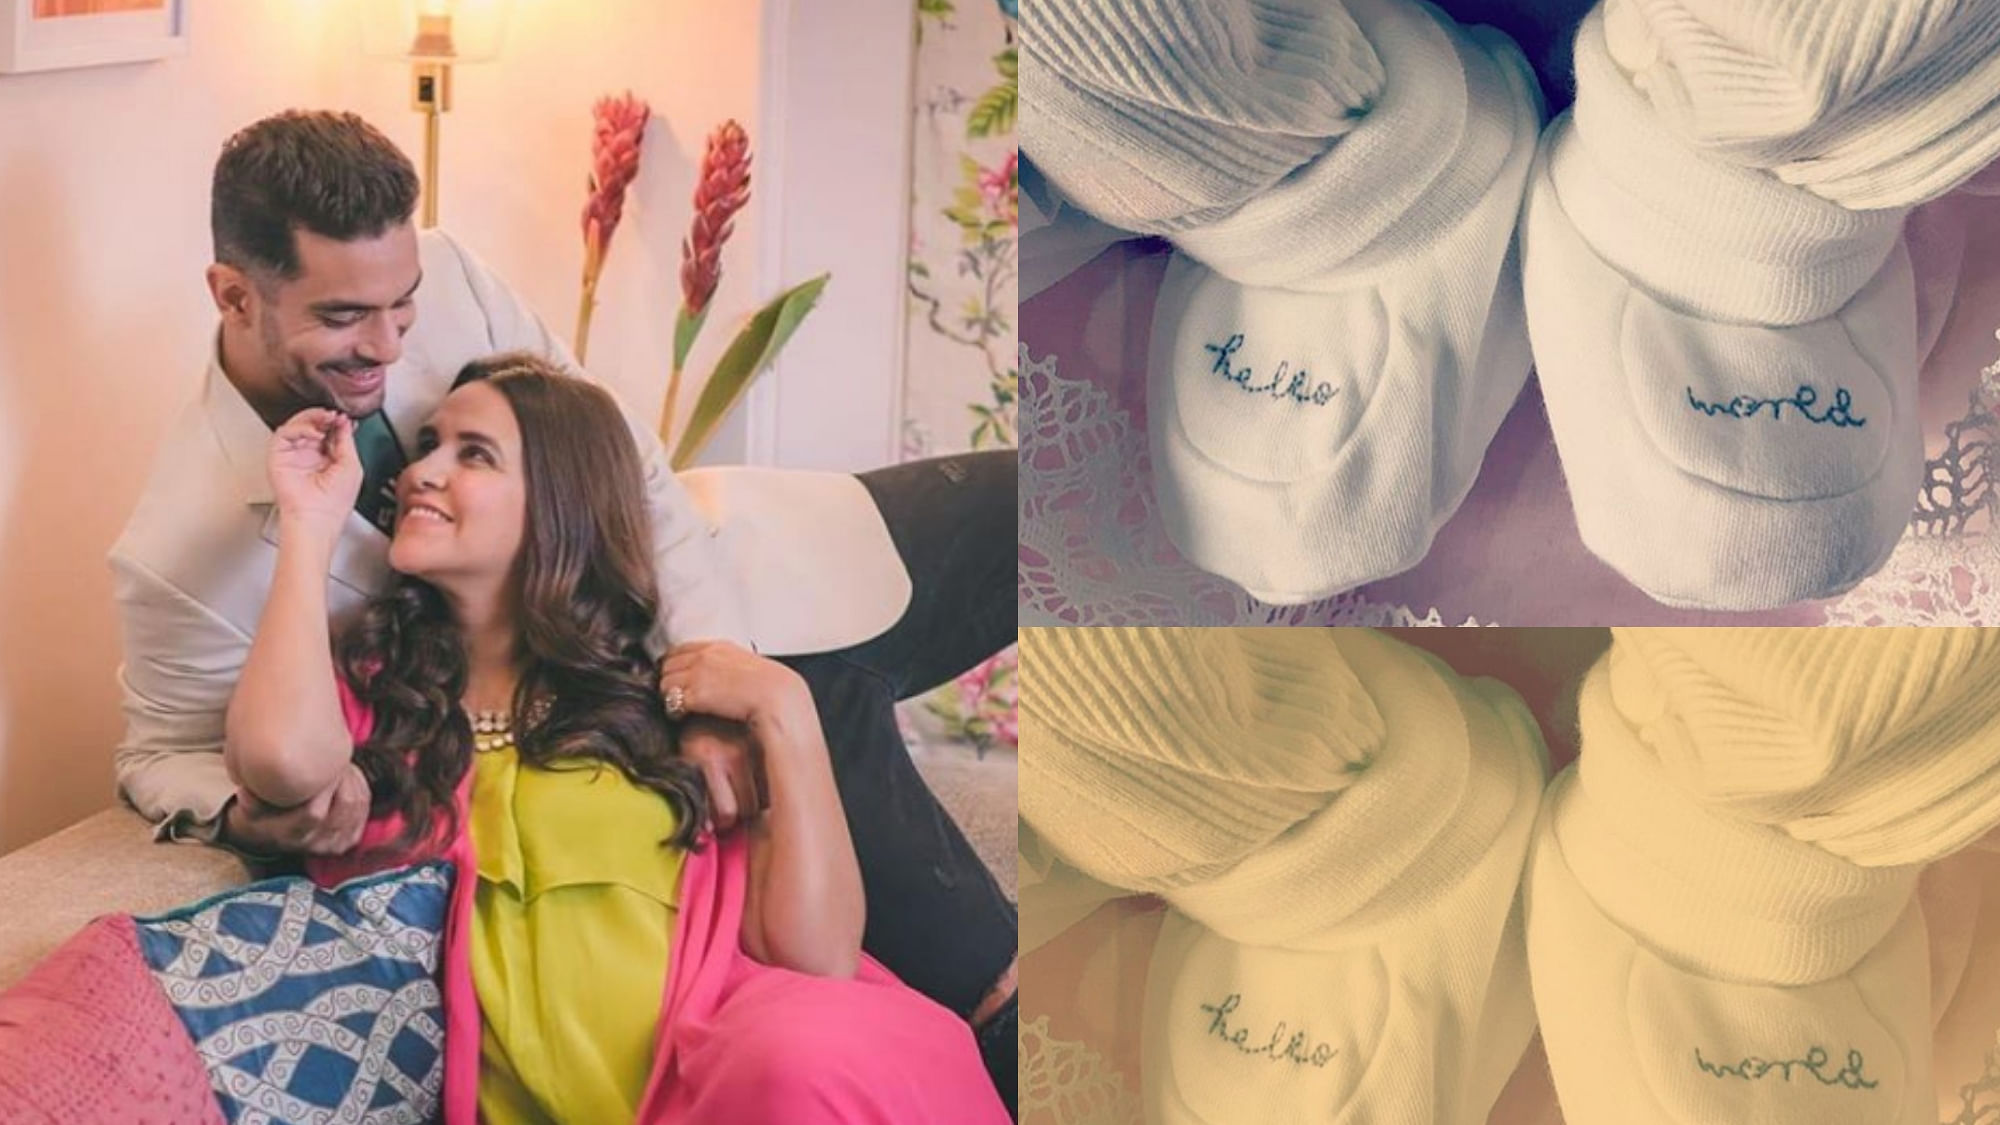 Actors Neha Dhupia and Angad Bedi welcomed their baby girl on 18 November. 